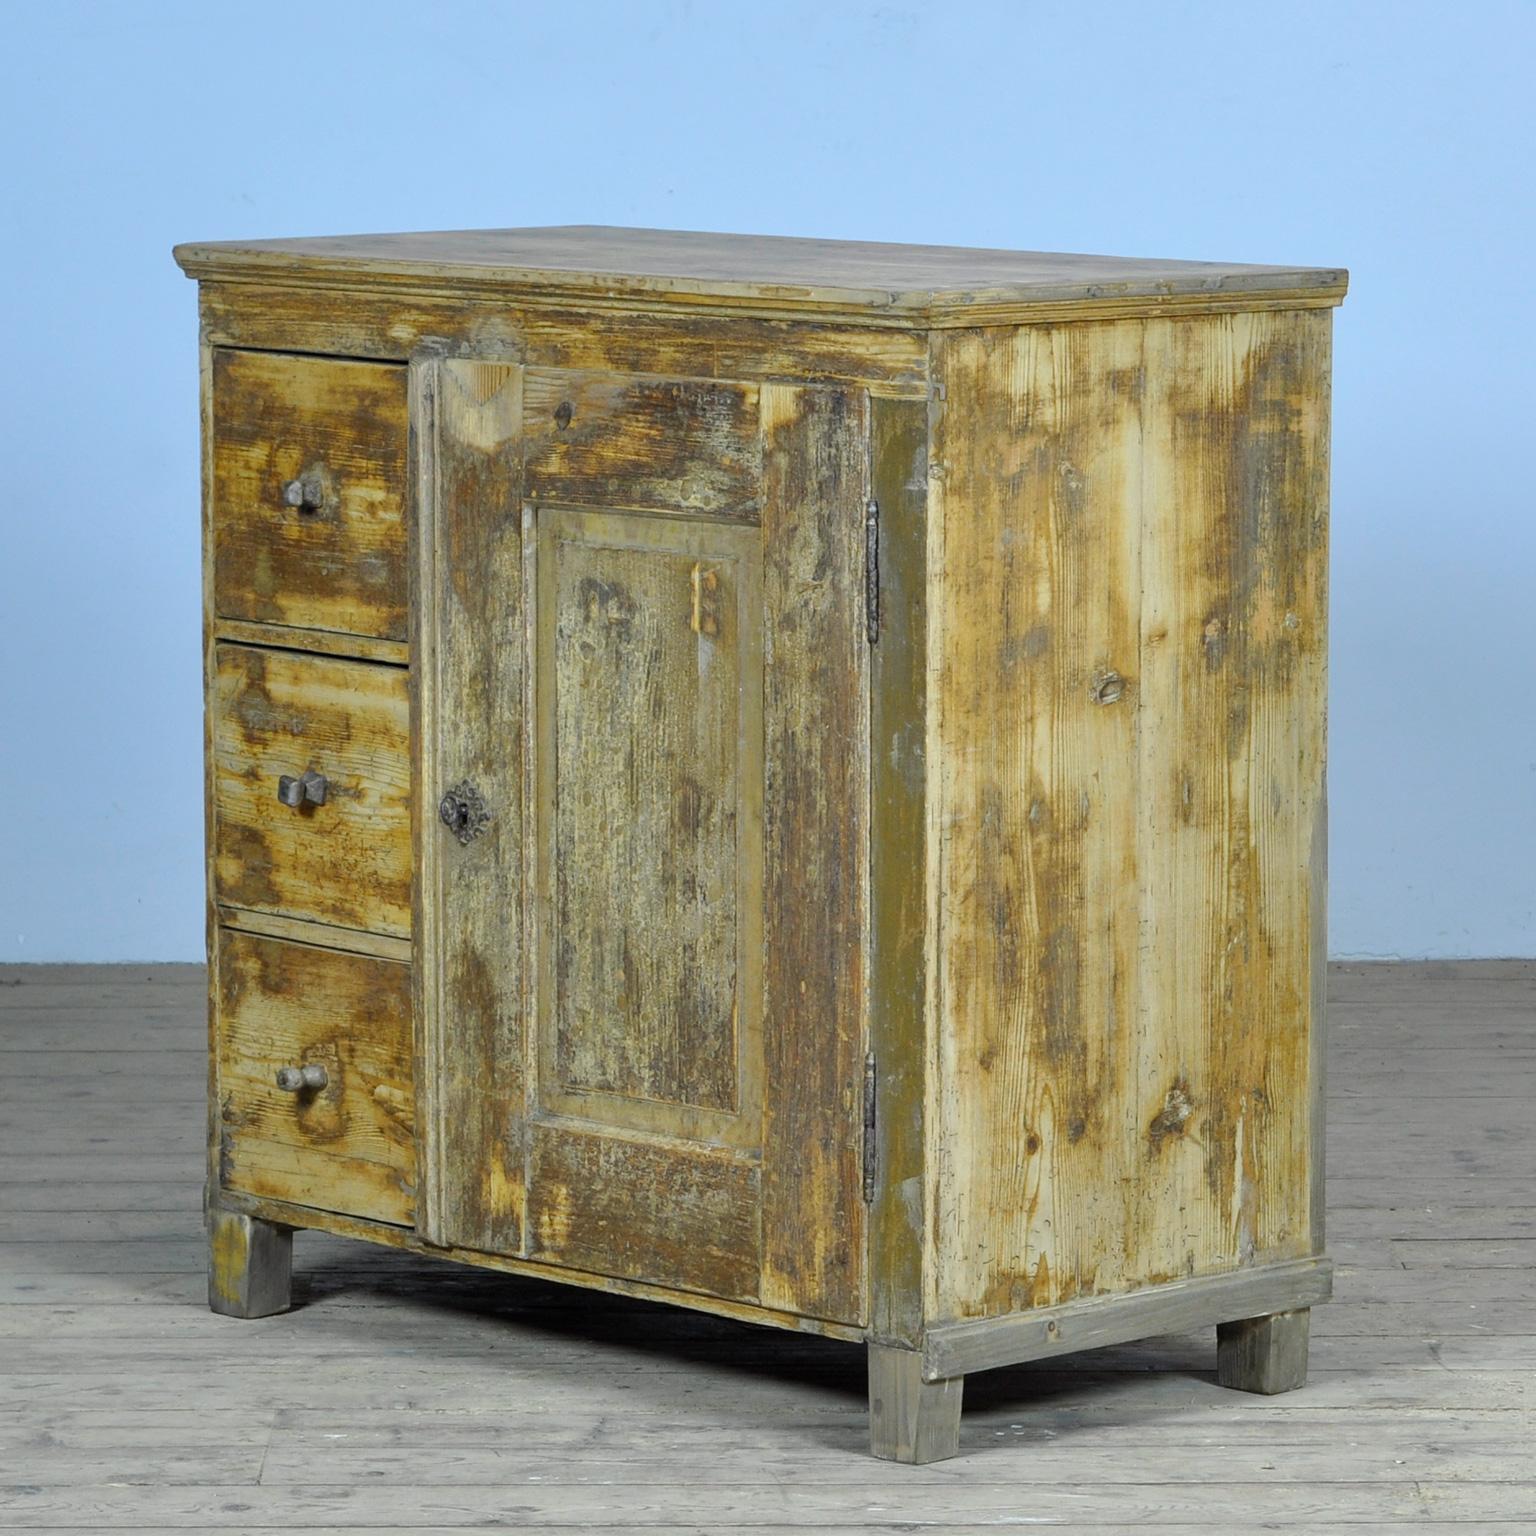 Hungarian Antique Pine Cabinet With 3 Drawers, Circa 1900